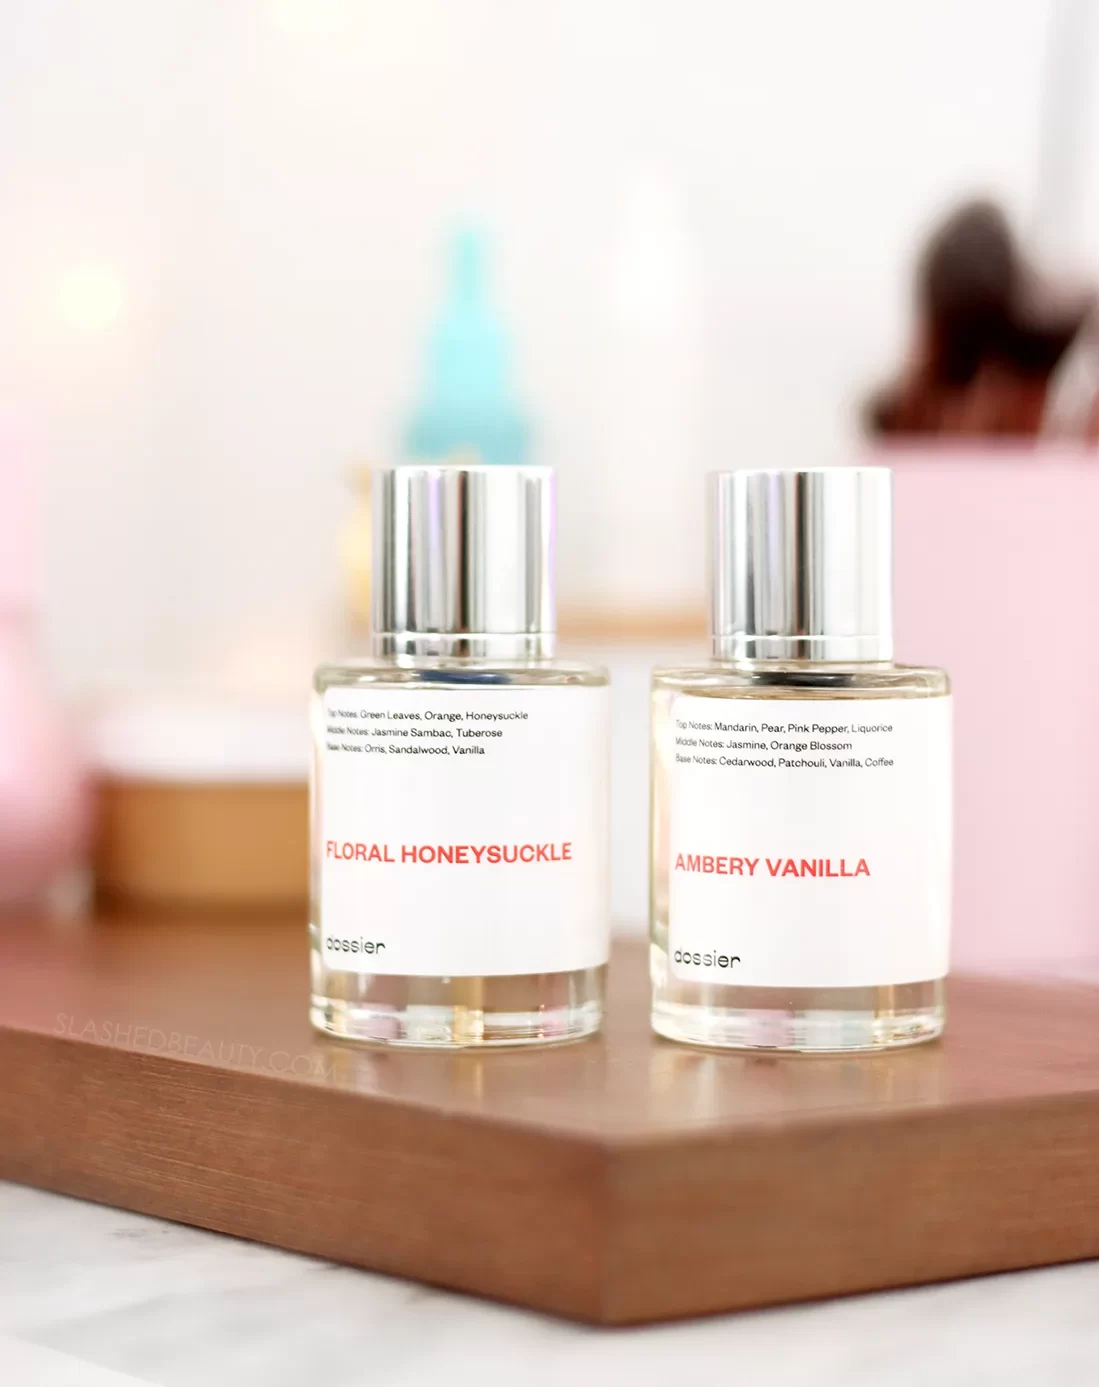 Two bottles of Dossier perfume sitting on a vanity| Dossier Perfume Review | Slashed Beauty